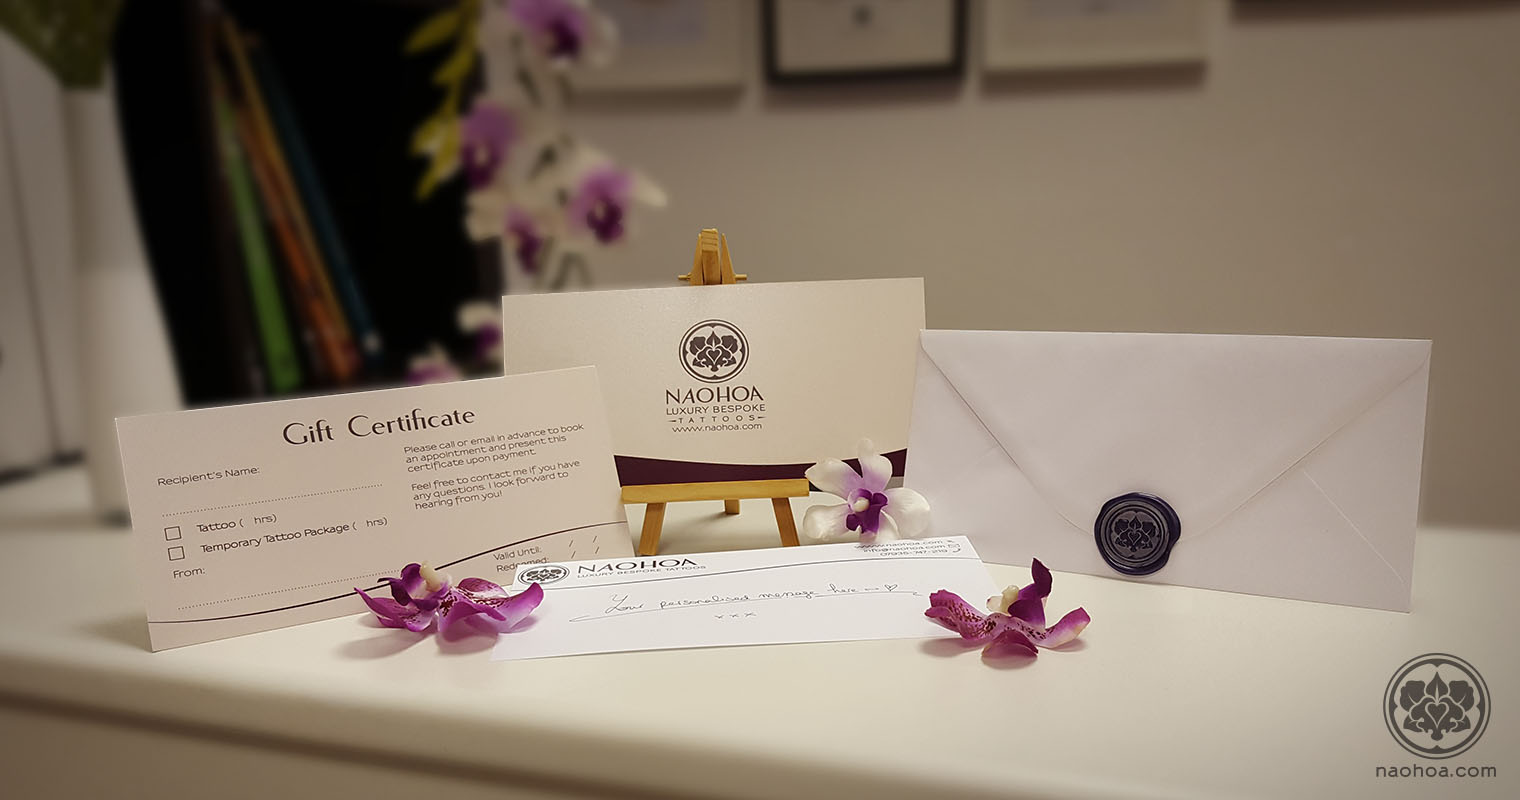 Photograph of Gift Certificates from NAOHOA Luxury Bespoke Tattoos, Cardiff. Founded by Naomi Hoang.